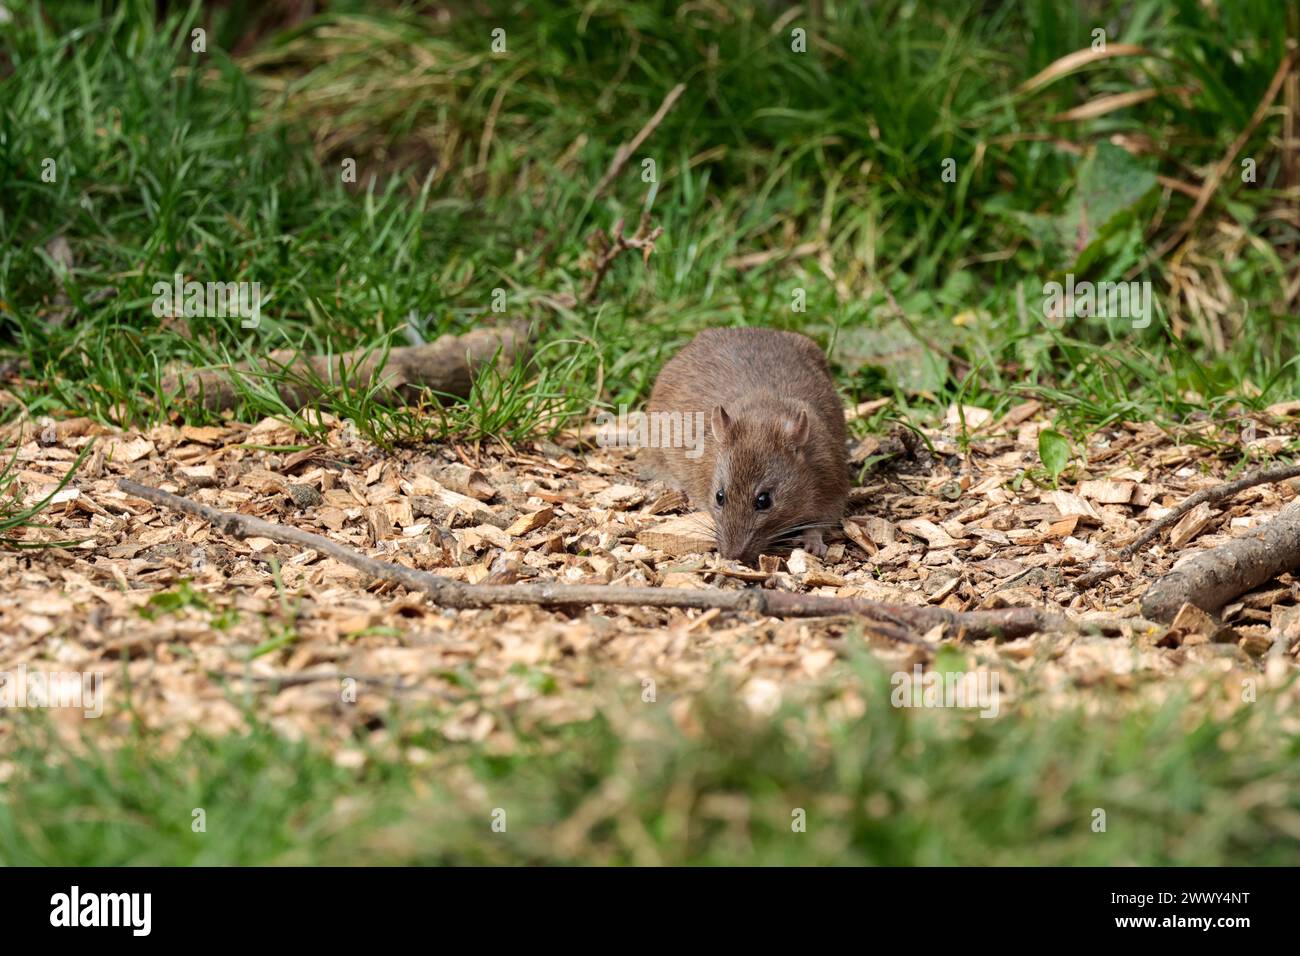 Rat brown Rattus norvegicus, under bird feeder in hide, grey brown fur long scaly tail pointed face small rounded ears pink nose and feet spring UK Stock Photo